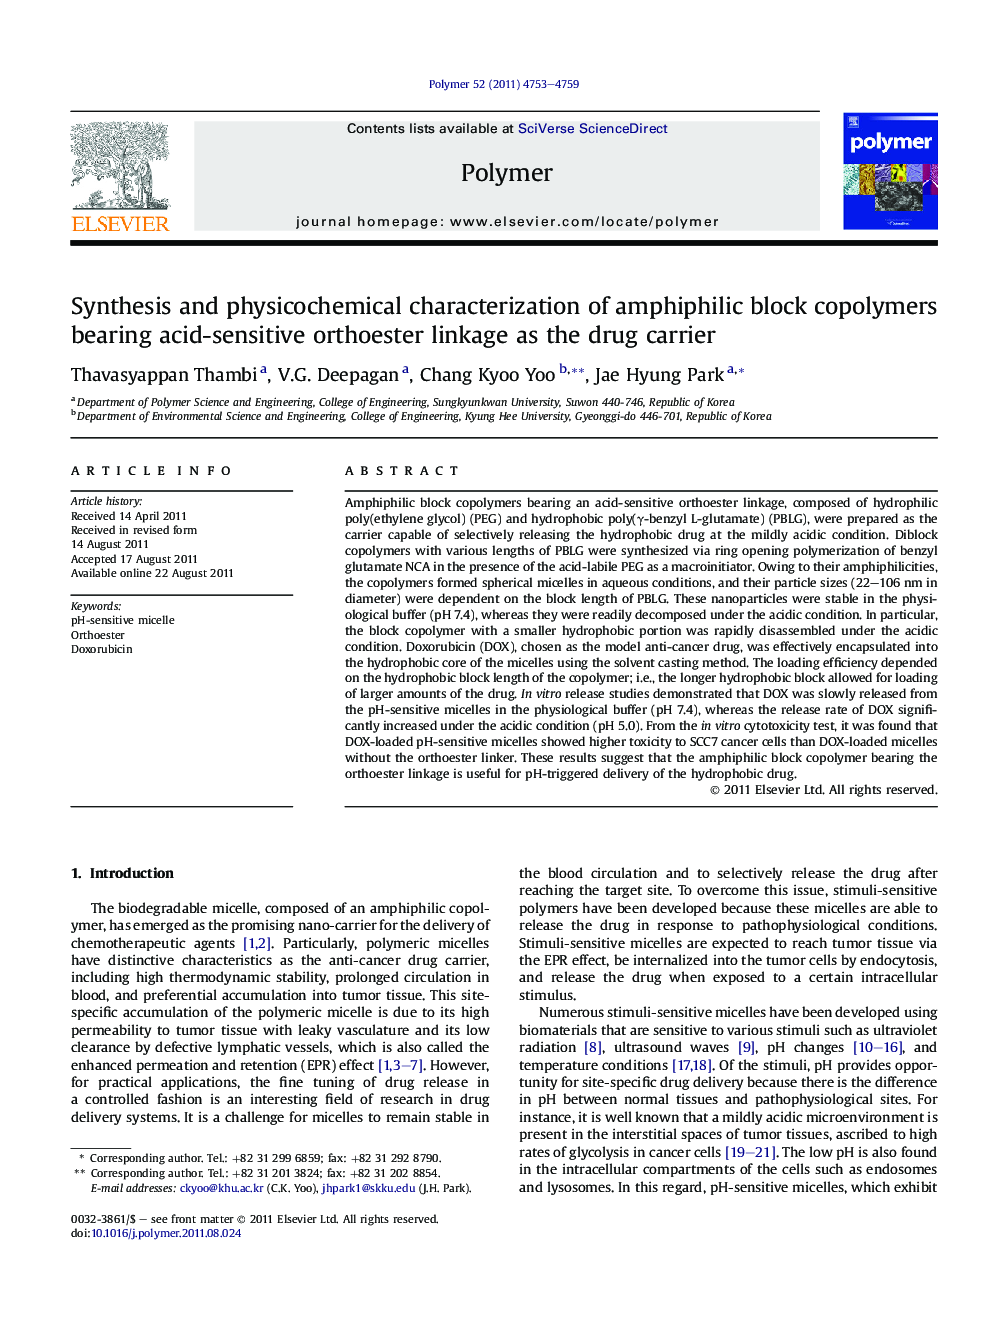 Synthesis and physicochemical characterization of amphiphilic block copolymers bearing acid-sensitive orthoester linkage as the drug carrier